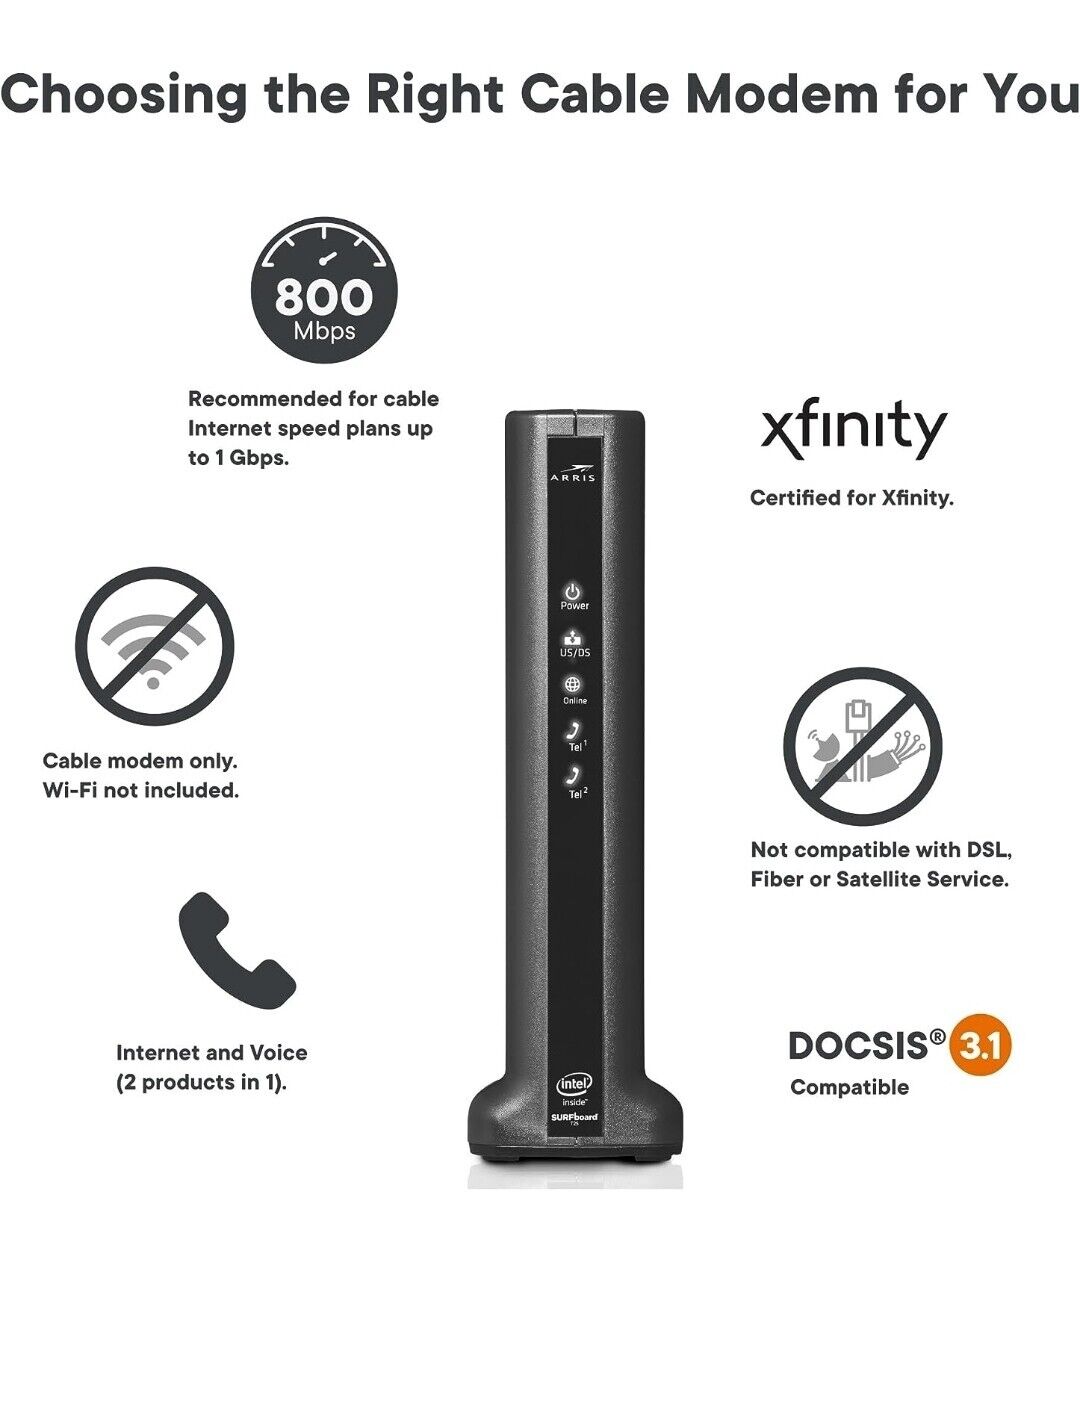 ARRIS T25 DOCSIS 3.1 GIG  CABLE MODEM-XFINITY INTERNET & VOICE  FAST SHIPPING‼️